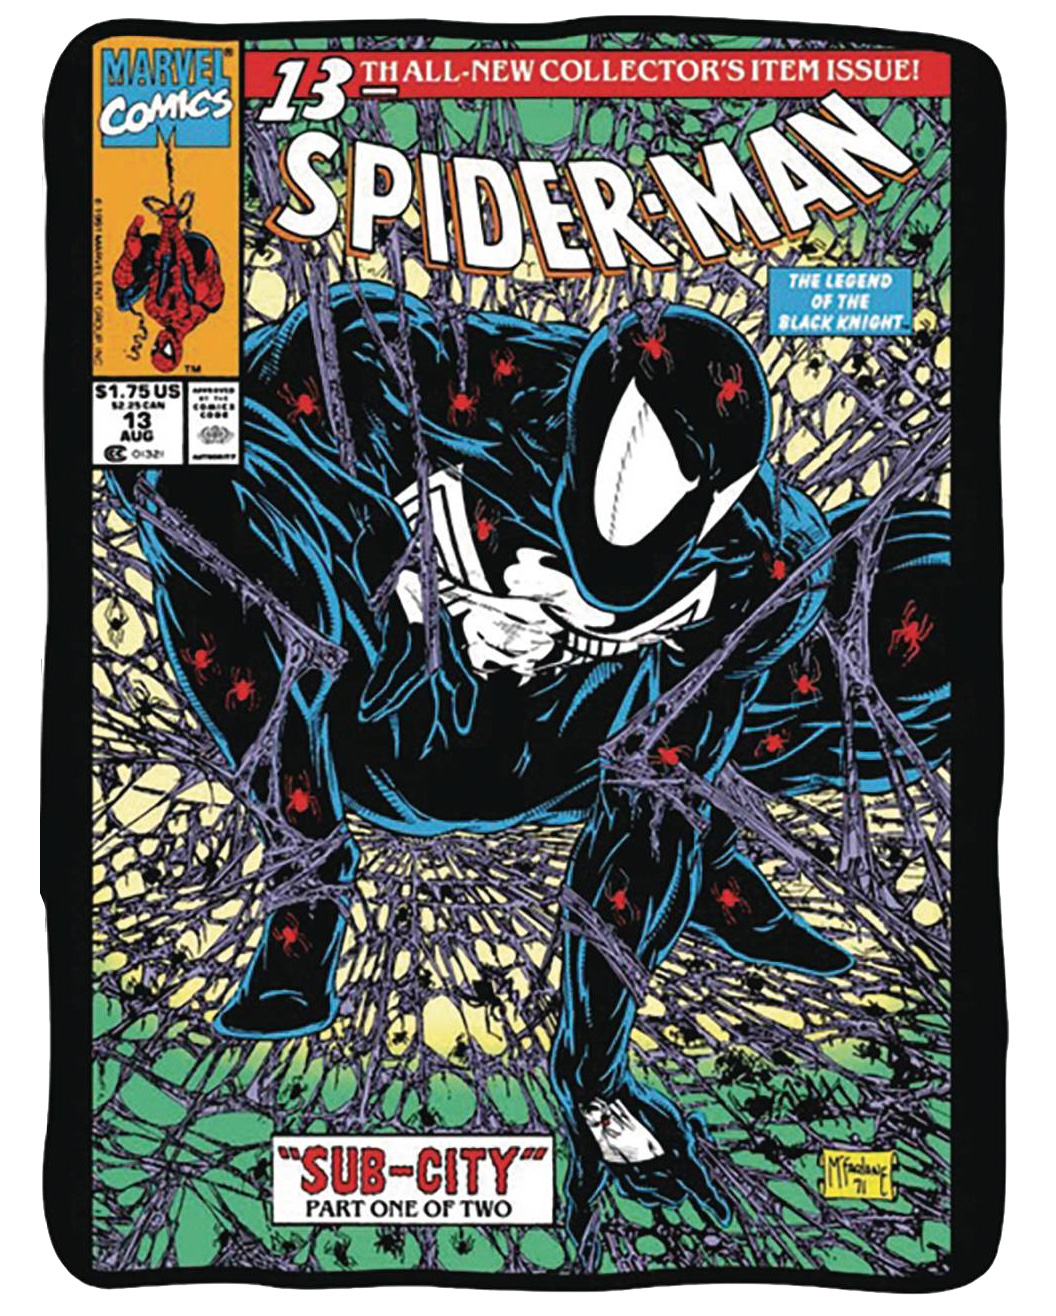 Spider-Man Comics Throw Blanket with Covers by Todd McFarlane (Spider-Man #1 1990)